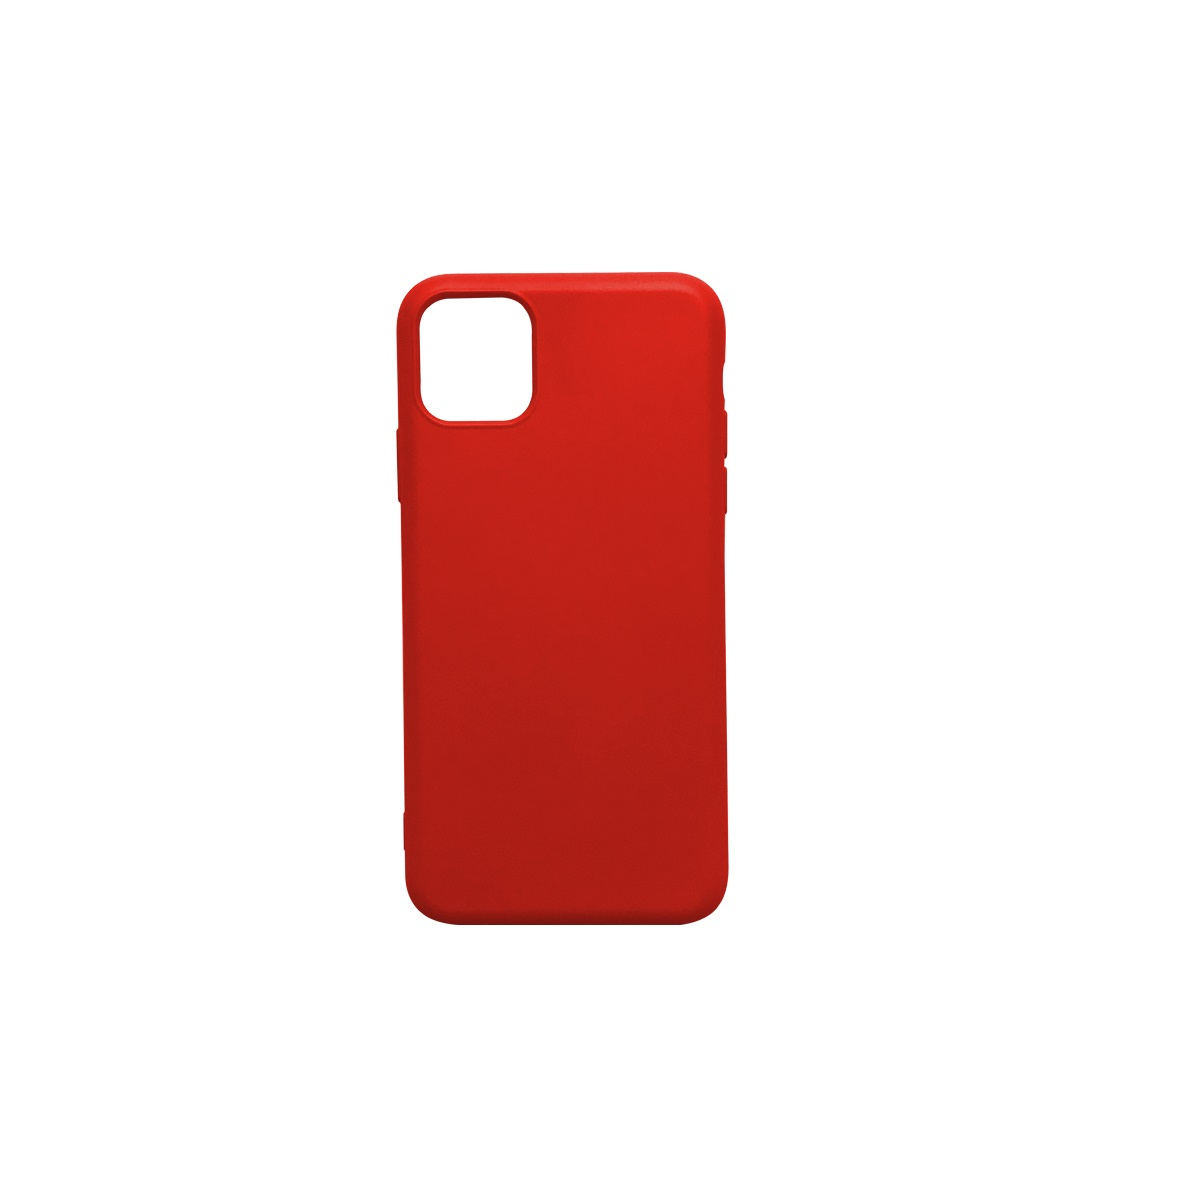 Rot iPhone Hülle, Apple, 11 Pro, VENTARENT Handyhülle, iPhone Backcover,